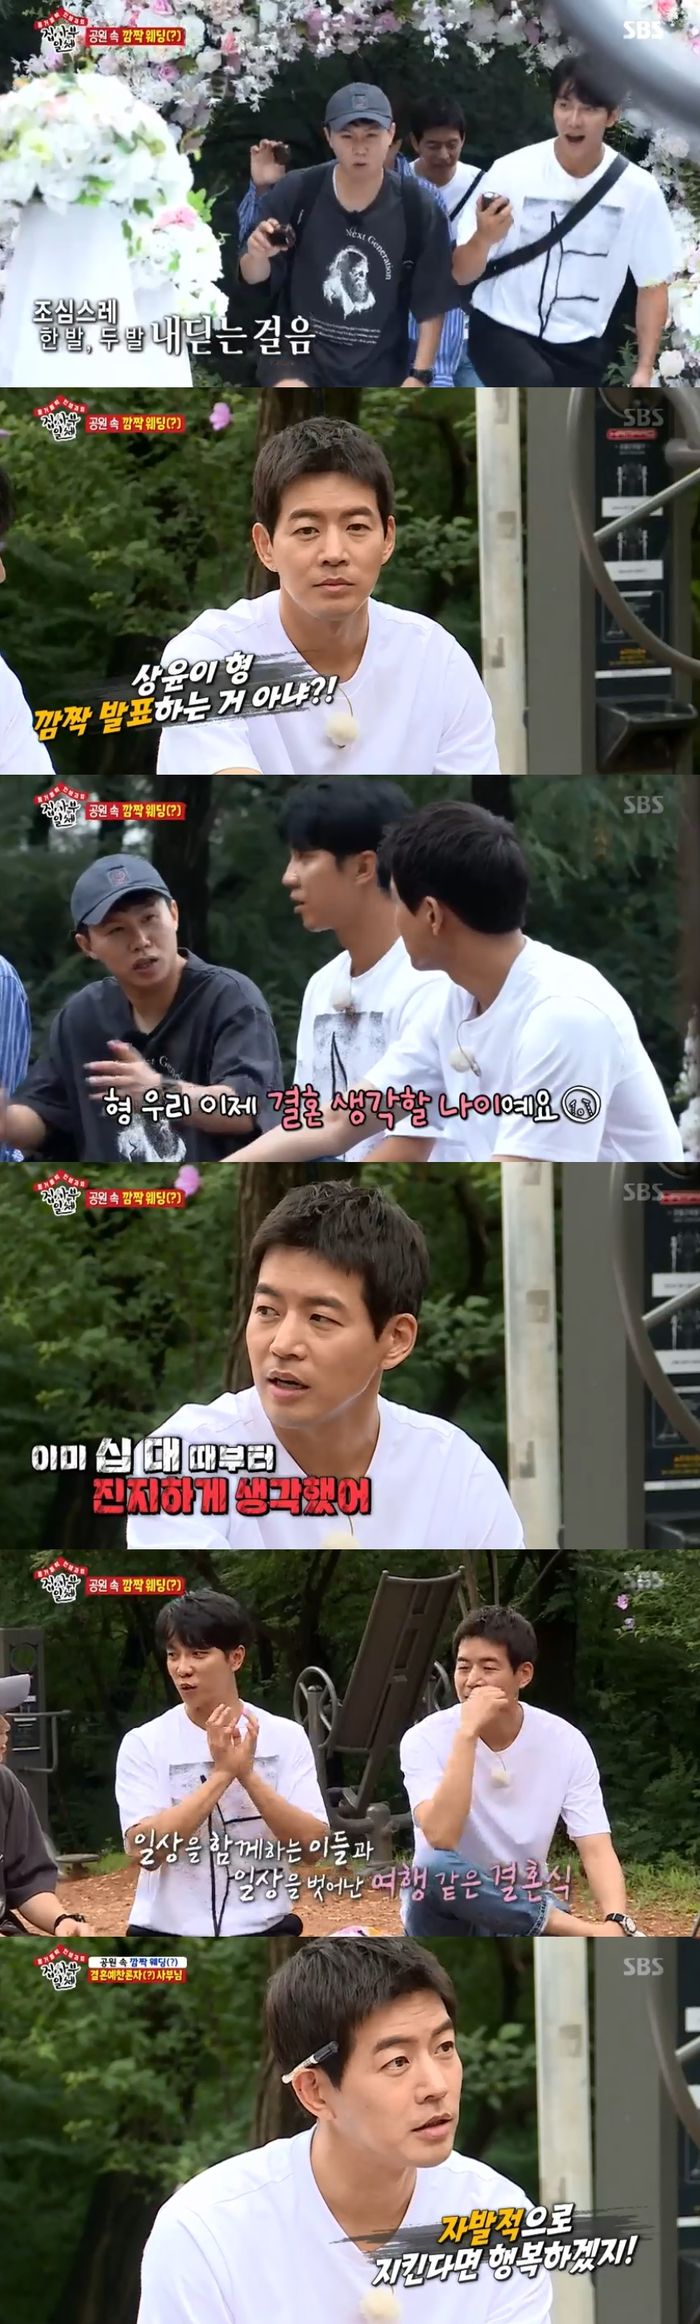 Lee Sang-yoon Confessions his Attitude to MarriageOn SBS All The Butlers broadcast on the 25th, All The Butlers members were shown talking about their dream Wedding ceremony.On this day, All The Butlers members arrived at a strange park and were embarrassed to see the wedding decorations set there.Lee Seung-gi, in an atmosphere that makes Wedding ceremony anticipated, said, Is not Sang Yoon making a surprise announcement?Yang Se-hyeong added, My brother is serious about marriage.Lee Sang-yoon then responded by saying, Marriage has been seriously thinking since she was a teenager.Afterwards, the members talked about the Wedding ceremony they dreamed of.I do not know if it will be possible, but I want to do Wedding ceremony with fans on SNS live, said Yook Sungjae.Lee Seung-gi then pointed out that it may be okay but in a way its just a personal addict.Lee Seung-gi also said, I would like to invite my usual acquaintances to travel and small weddings.Meanwhile, the members took a wedding invitation with hints from the master, where the Ten Commandments of the Couple were written. Lee Sang-yoon said, If you keep this voluntarily, you will be happy.But if you force me, I will be breathtaking. Is not it that your master has done all the experience and wrote it down? Maybe the couple will come out, Yook Sungjae said.